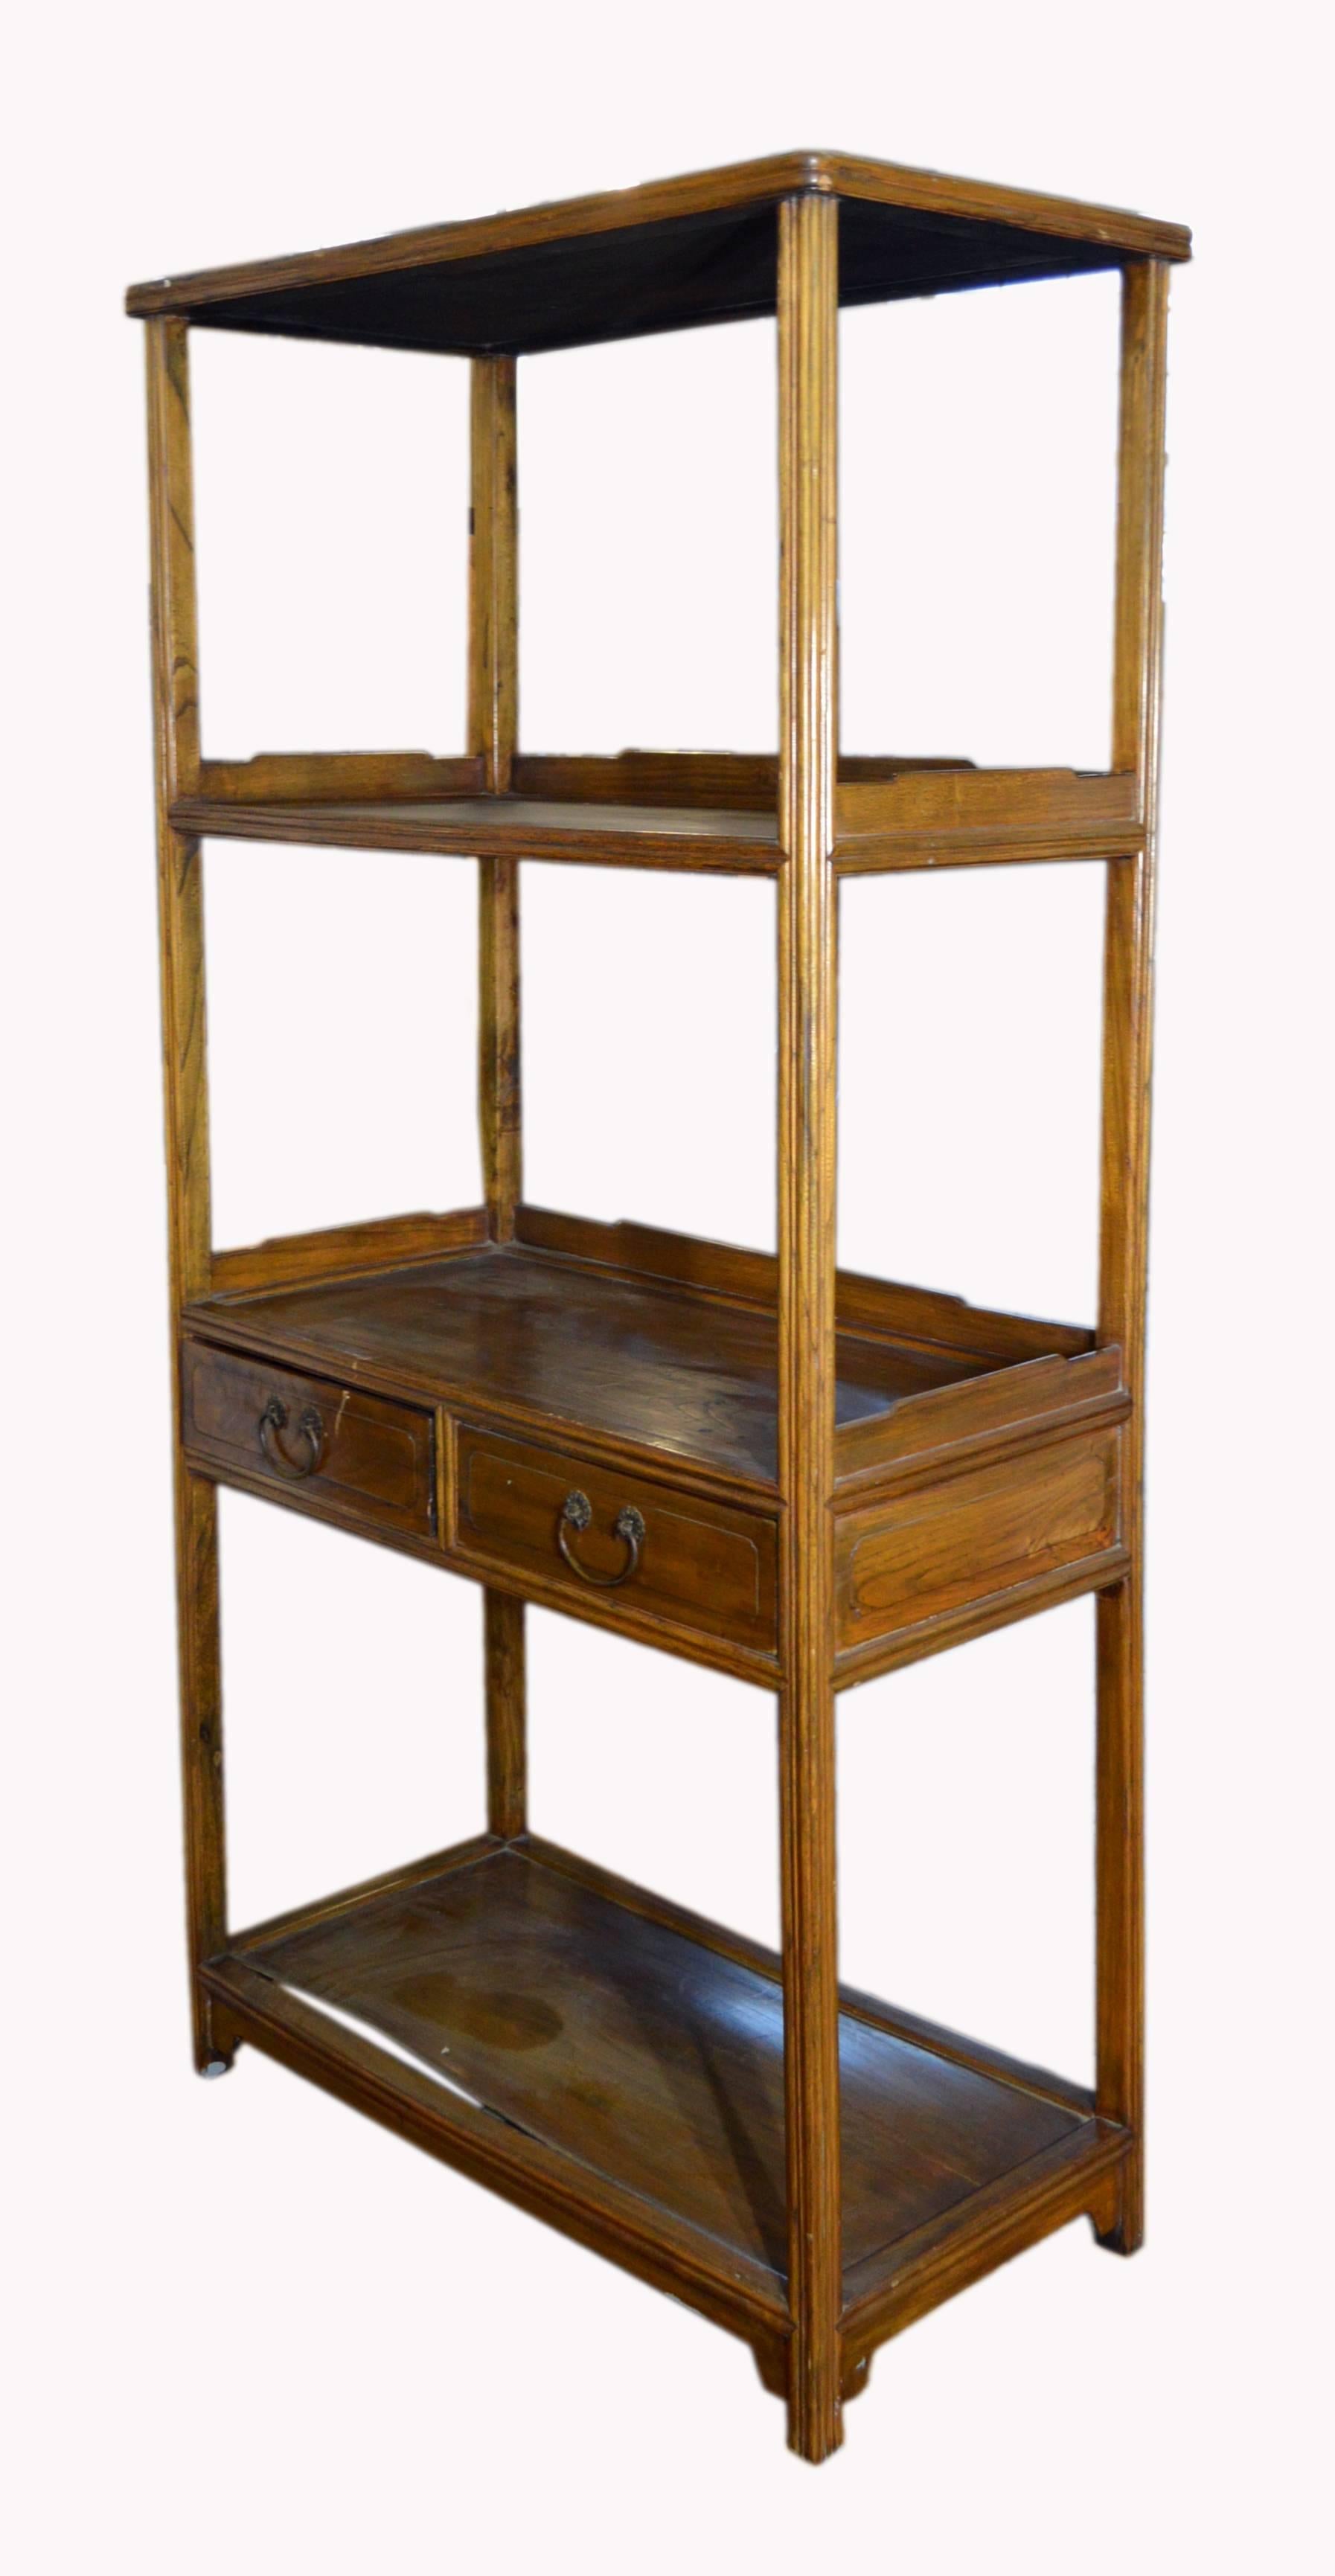 A Chinese early 20th century classic design bookcase with four shelves and two drawers. Crafted during the early 20th century, this wooden Chinese bookcase displays a classic design with two drawers. This elegant tall linear bookshelf features four